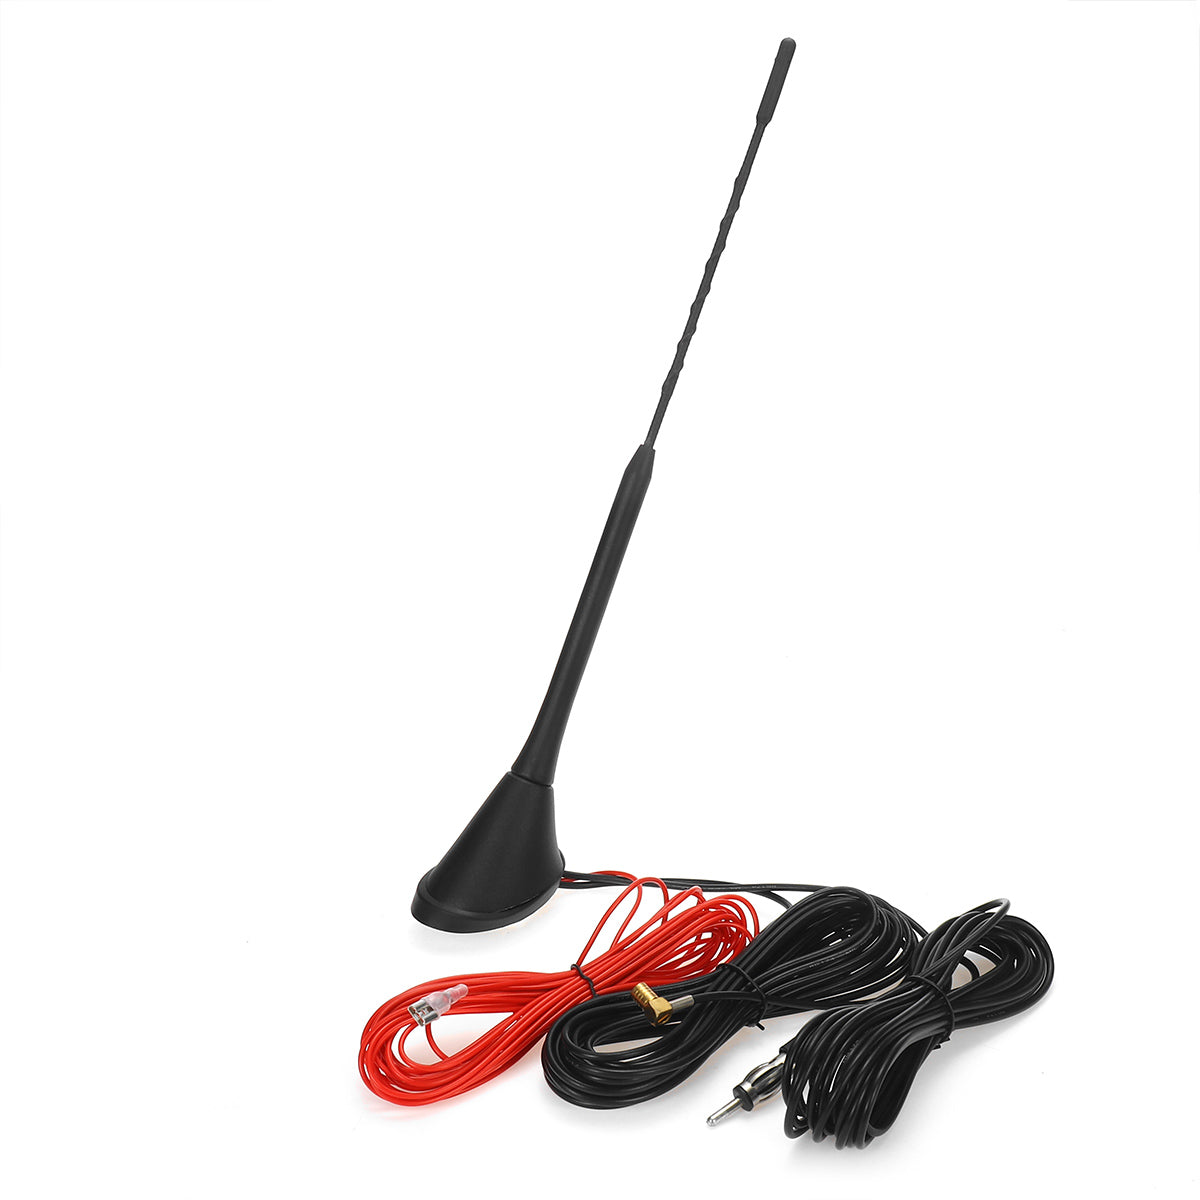 Firebrick Universal Car Roof Mounted Radio Antenna DAB AM FM Radio Amplifier Aerial With SMB DIN Connector